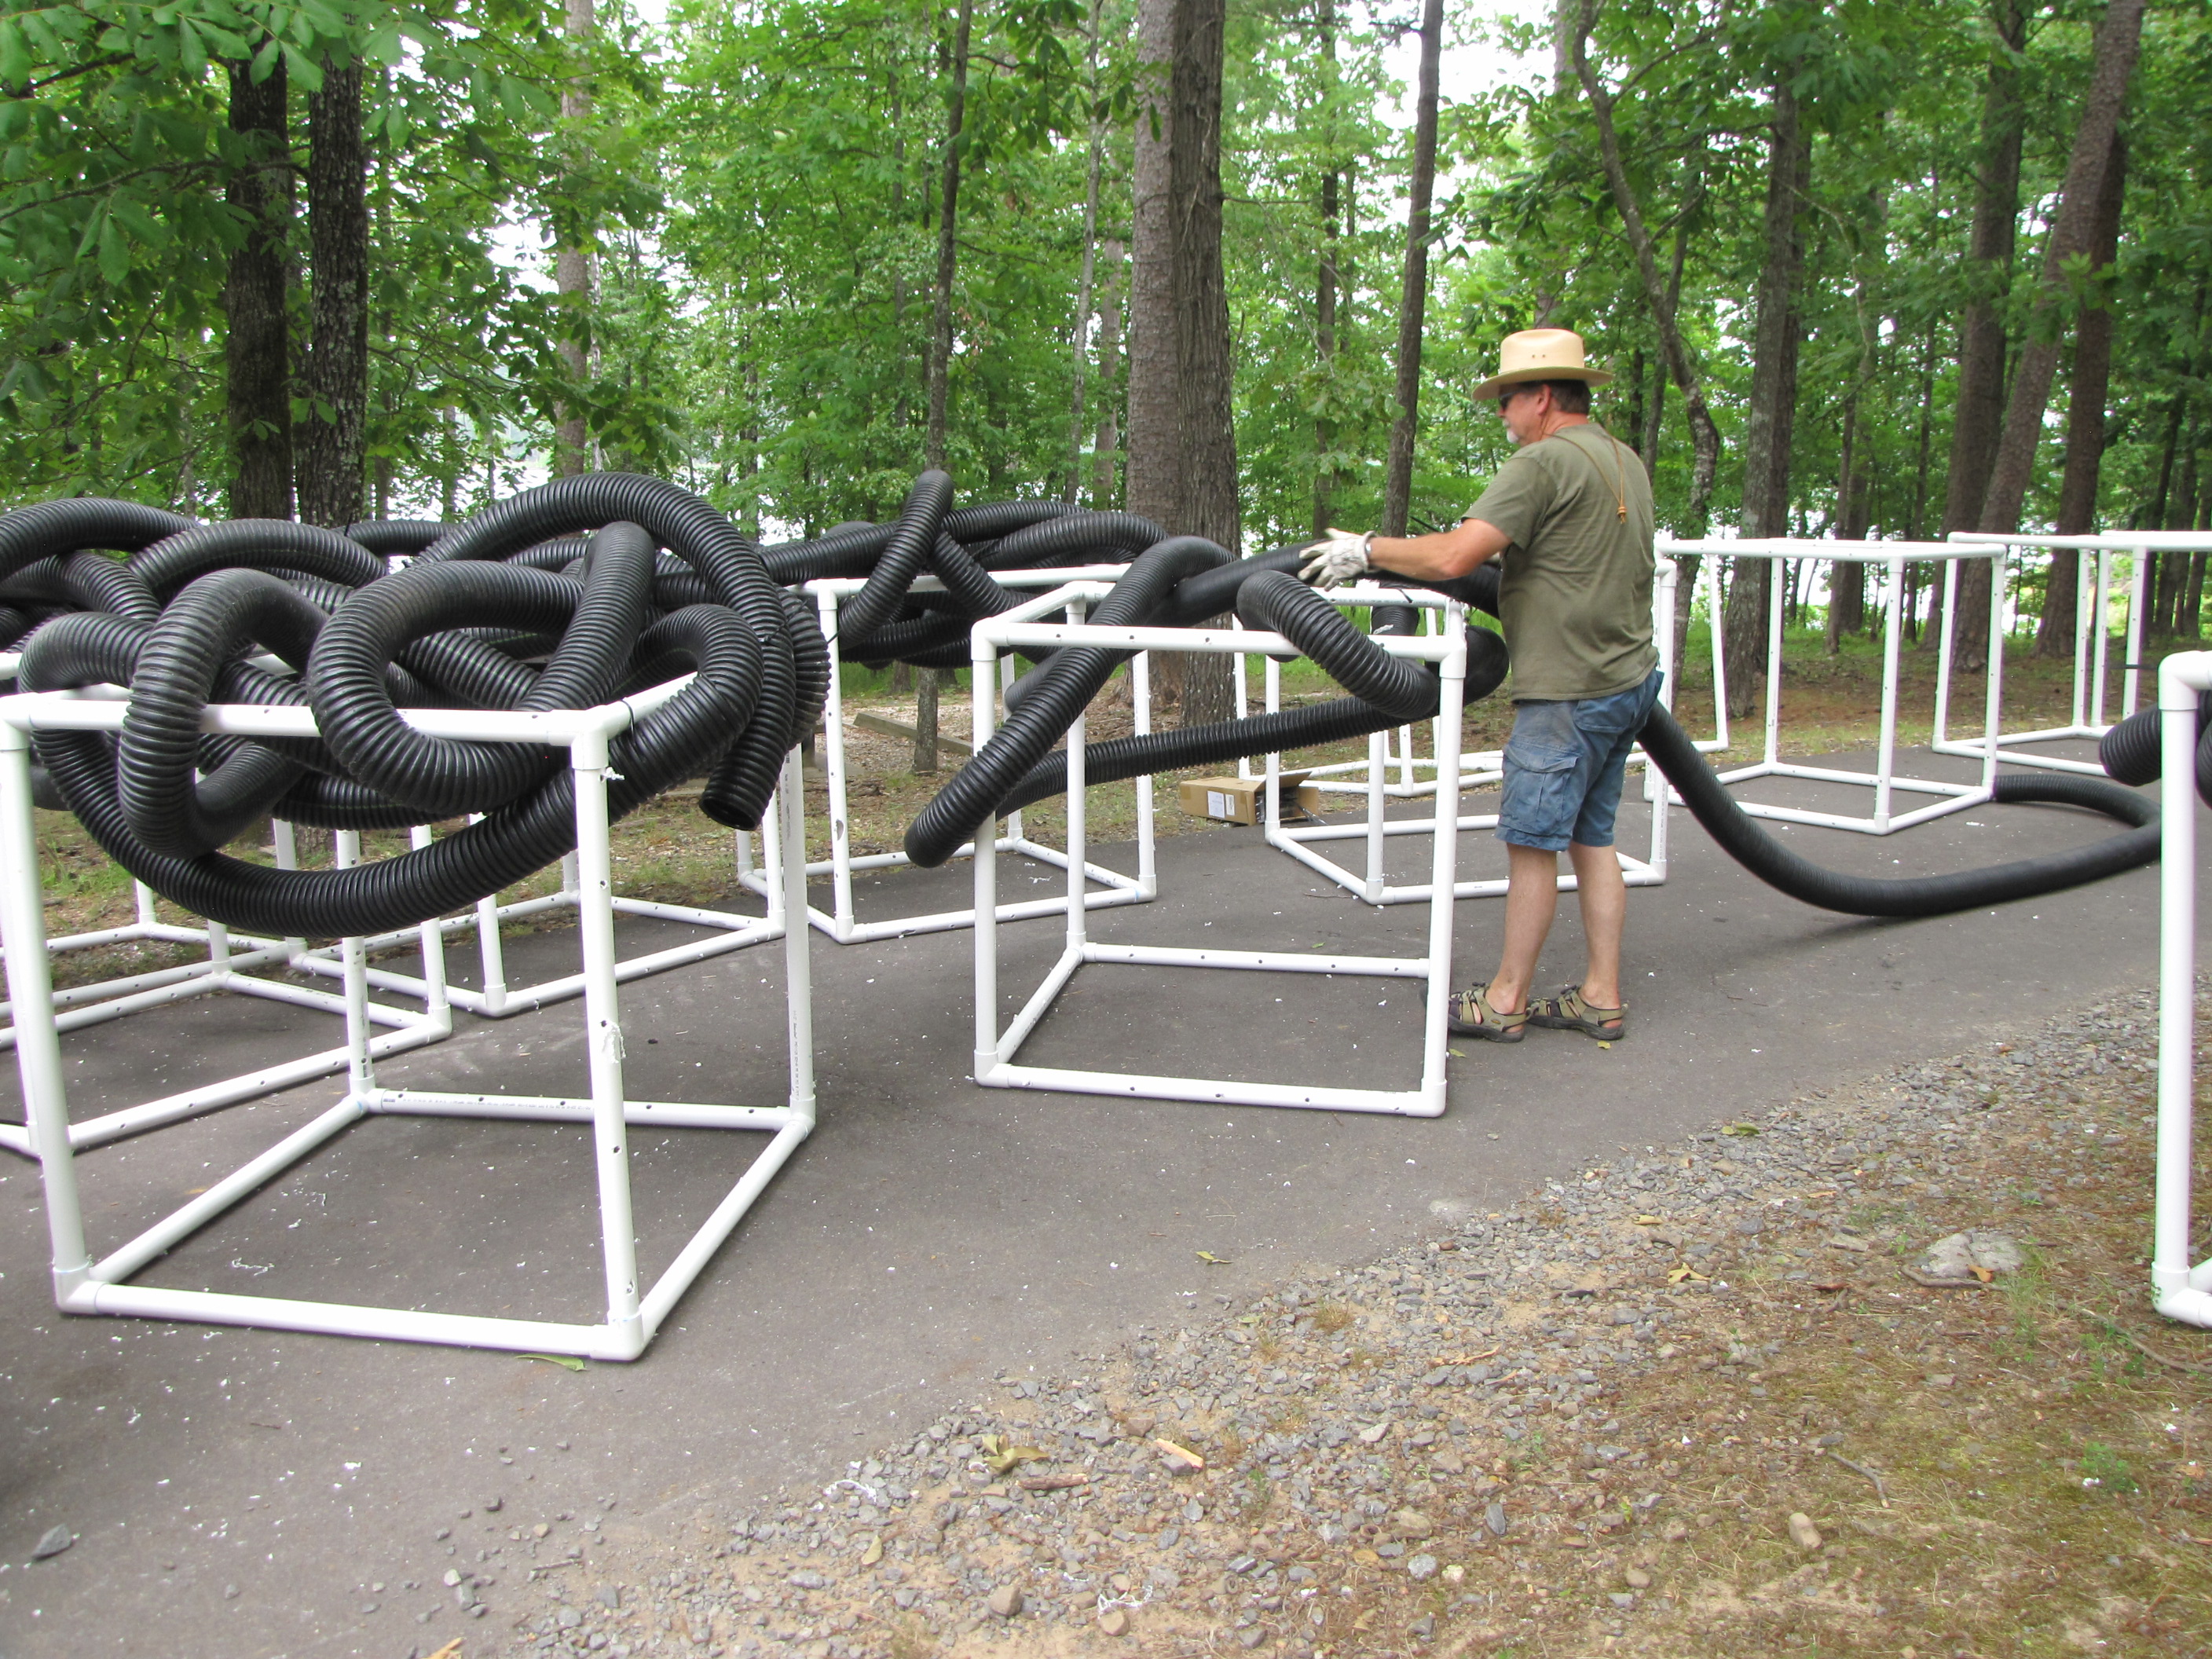 Courtesy of Arkansas Game and Fish Commission. Artificial habitat using PVC pipe and plastic tubing